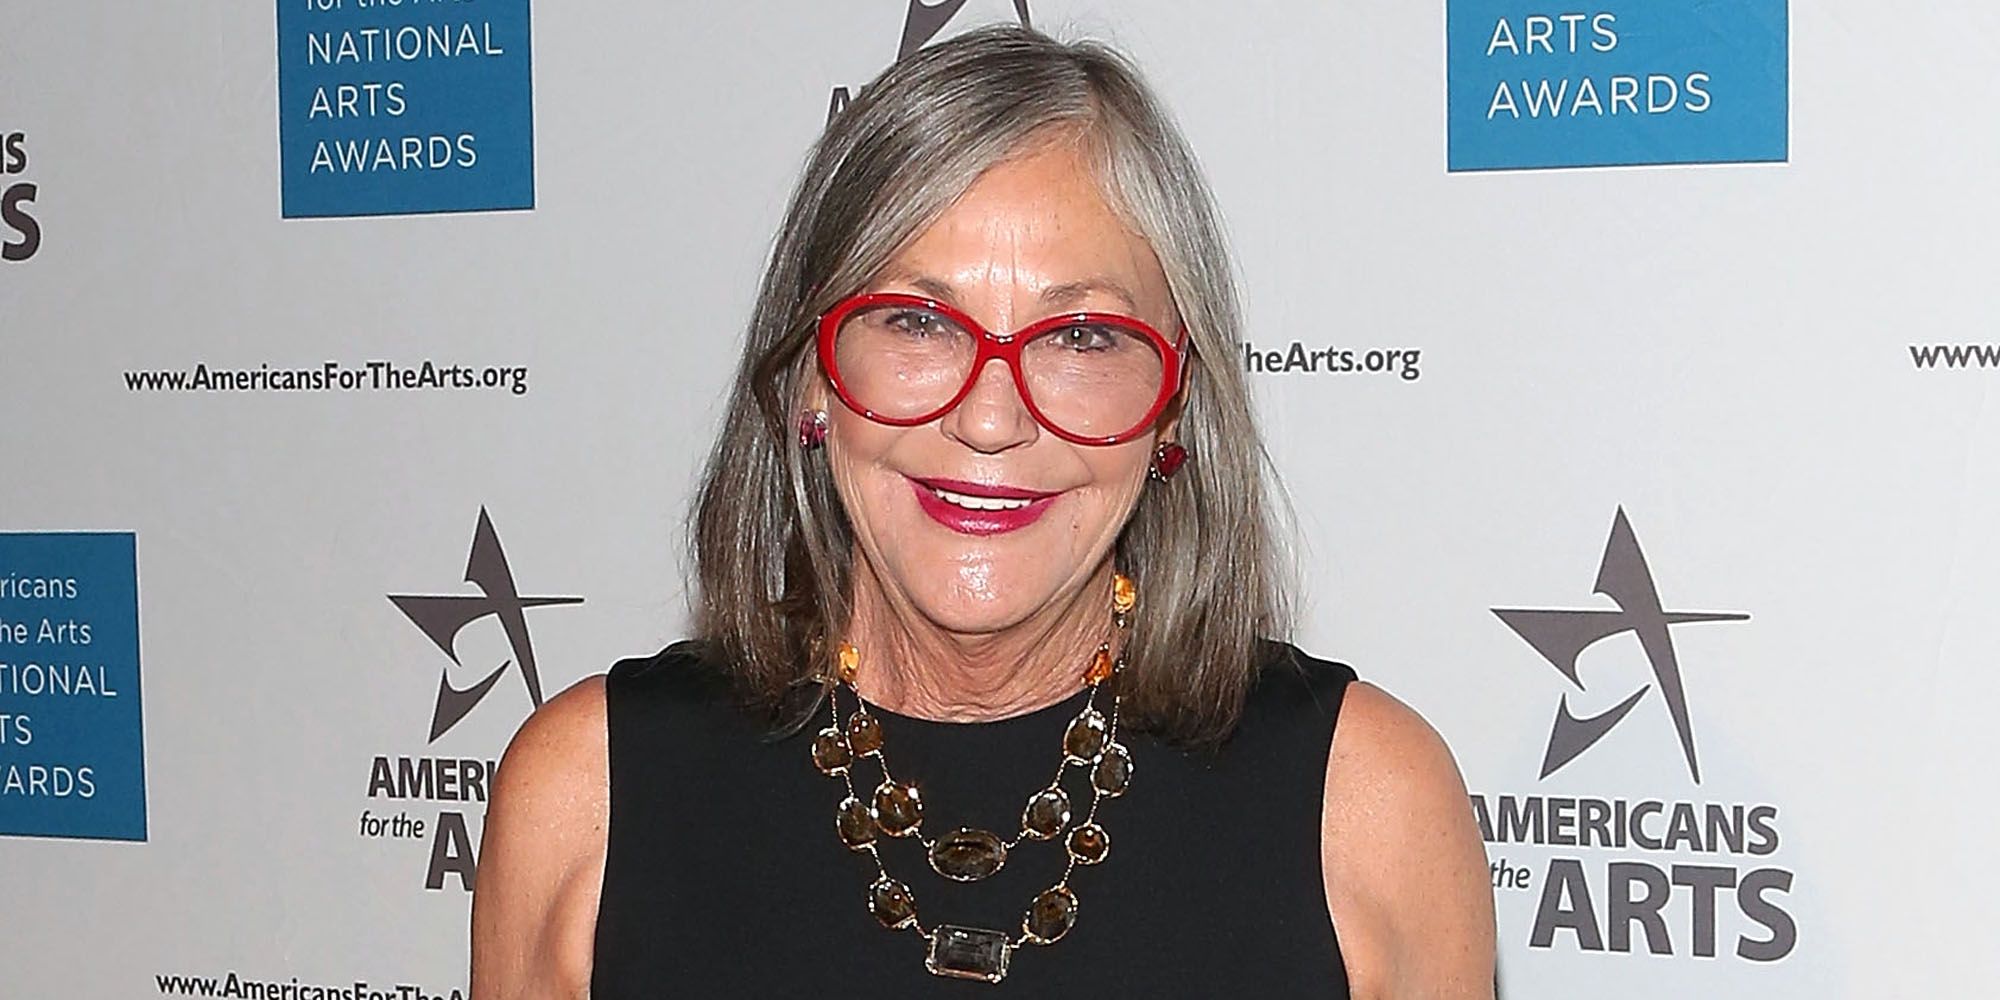 Alice Walton Is the Richest Woman in the World